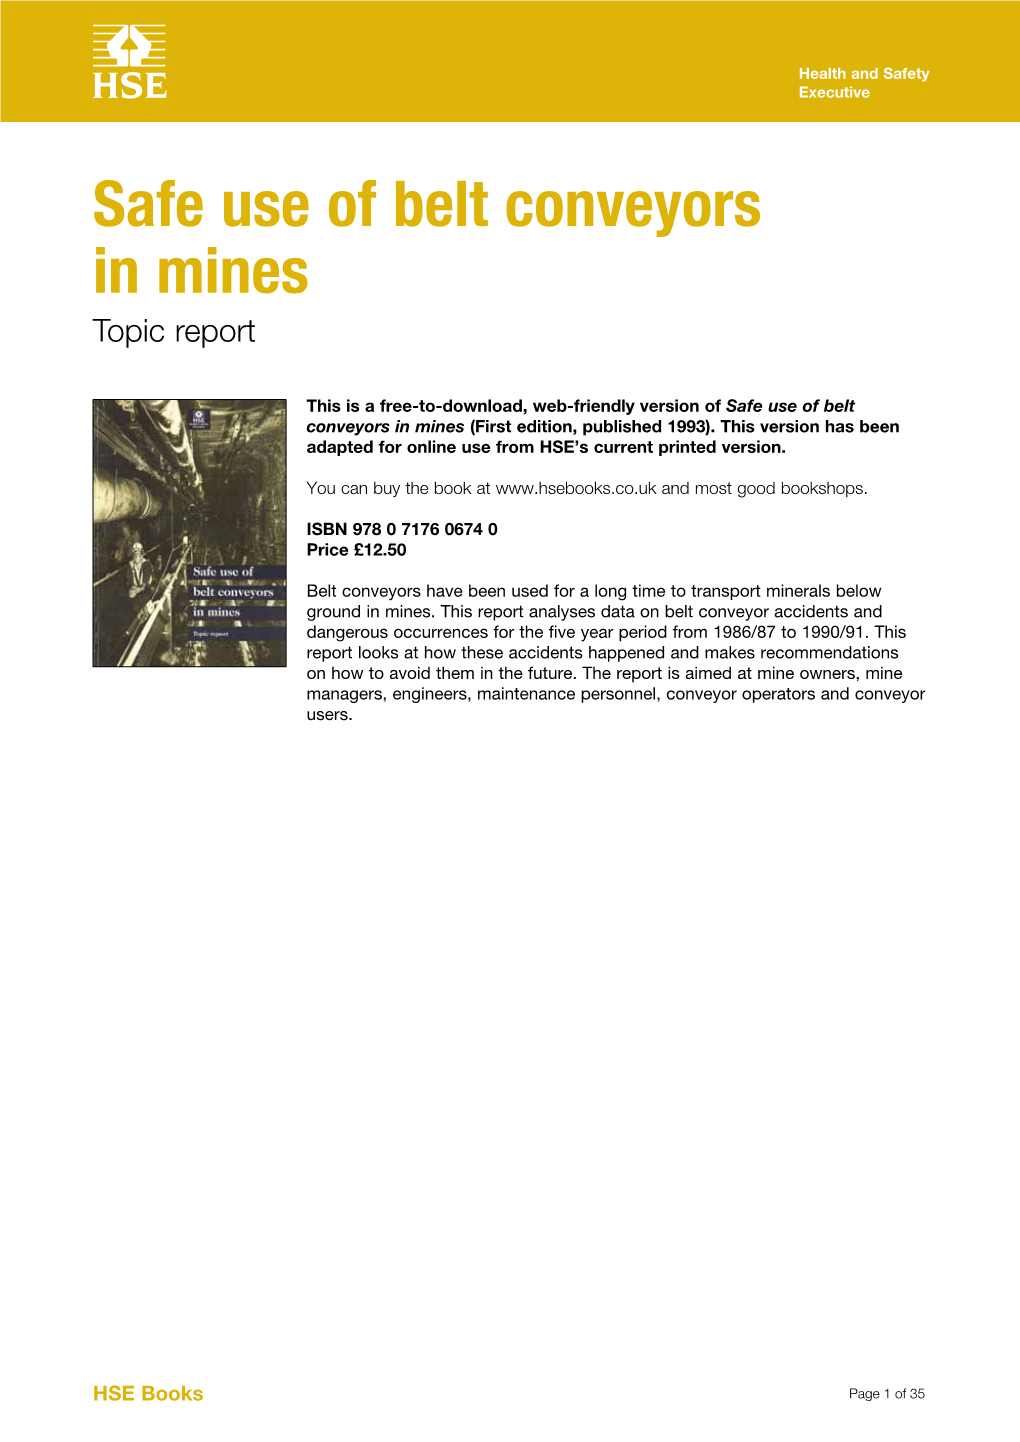 Safe Use of Belt Conveyors in Mines Topic Report